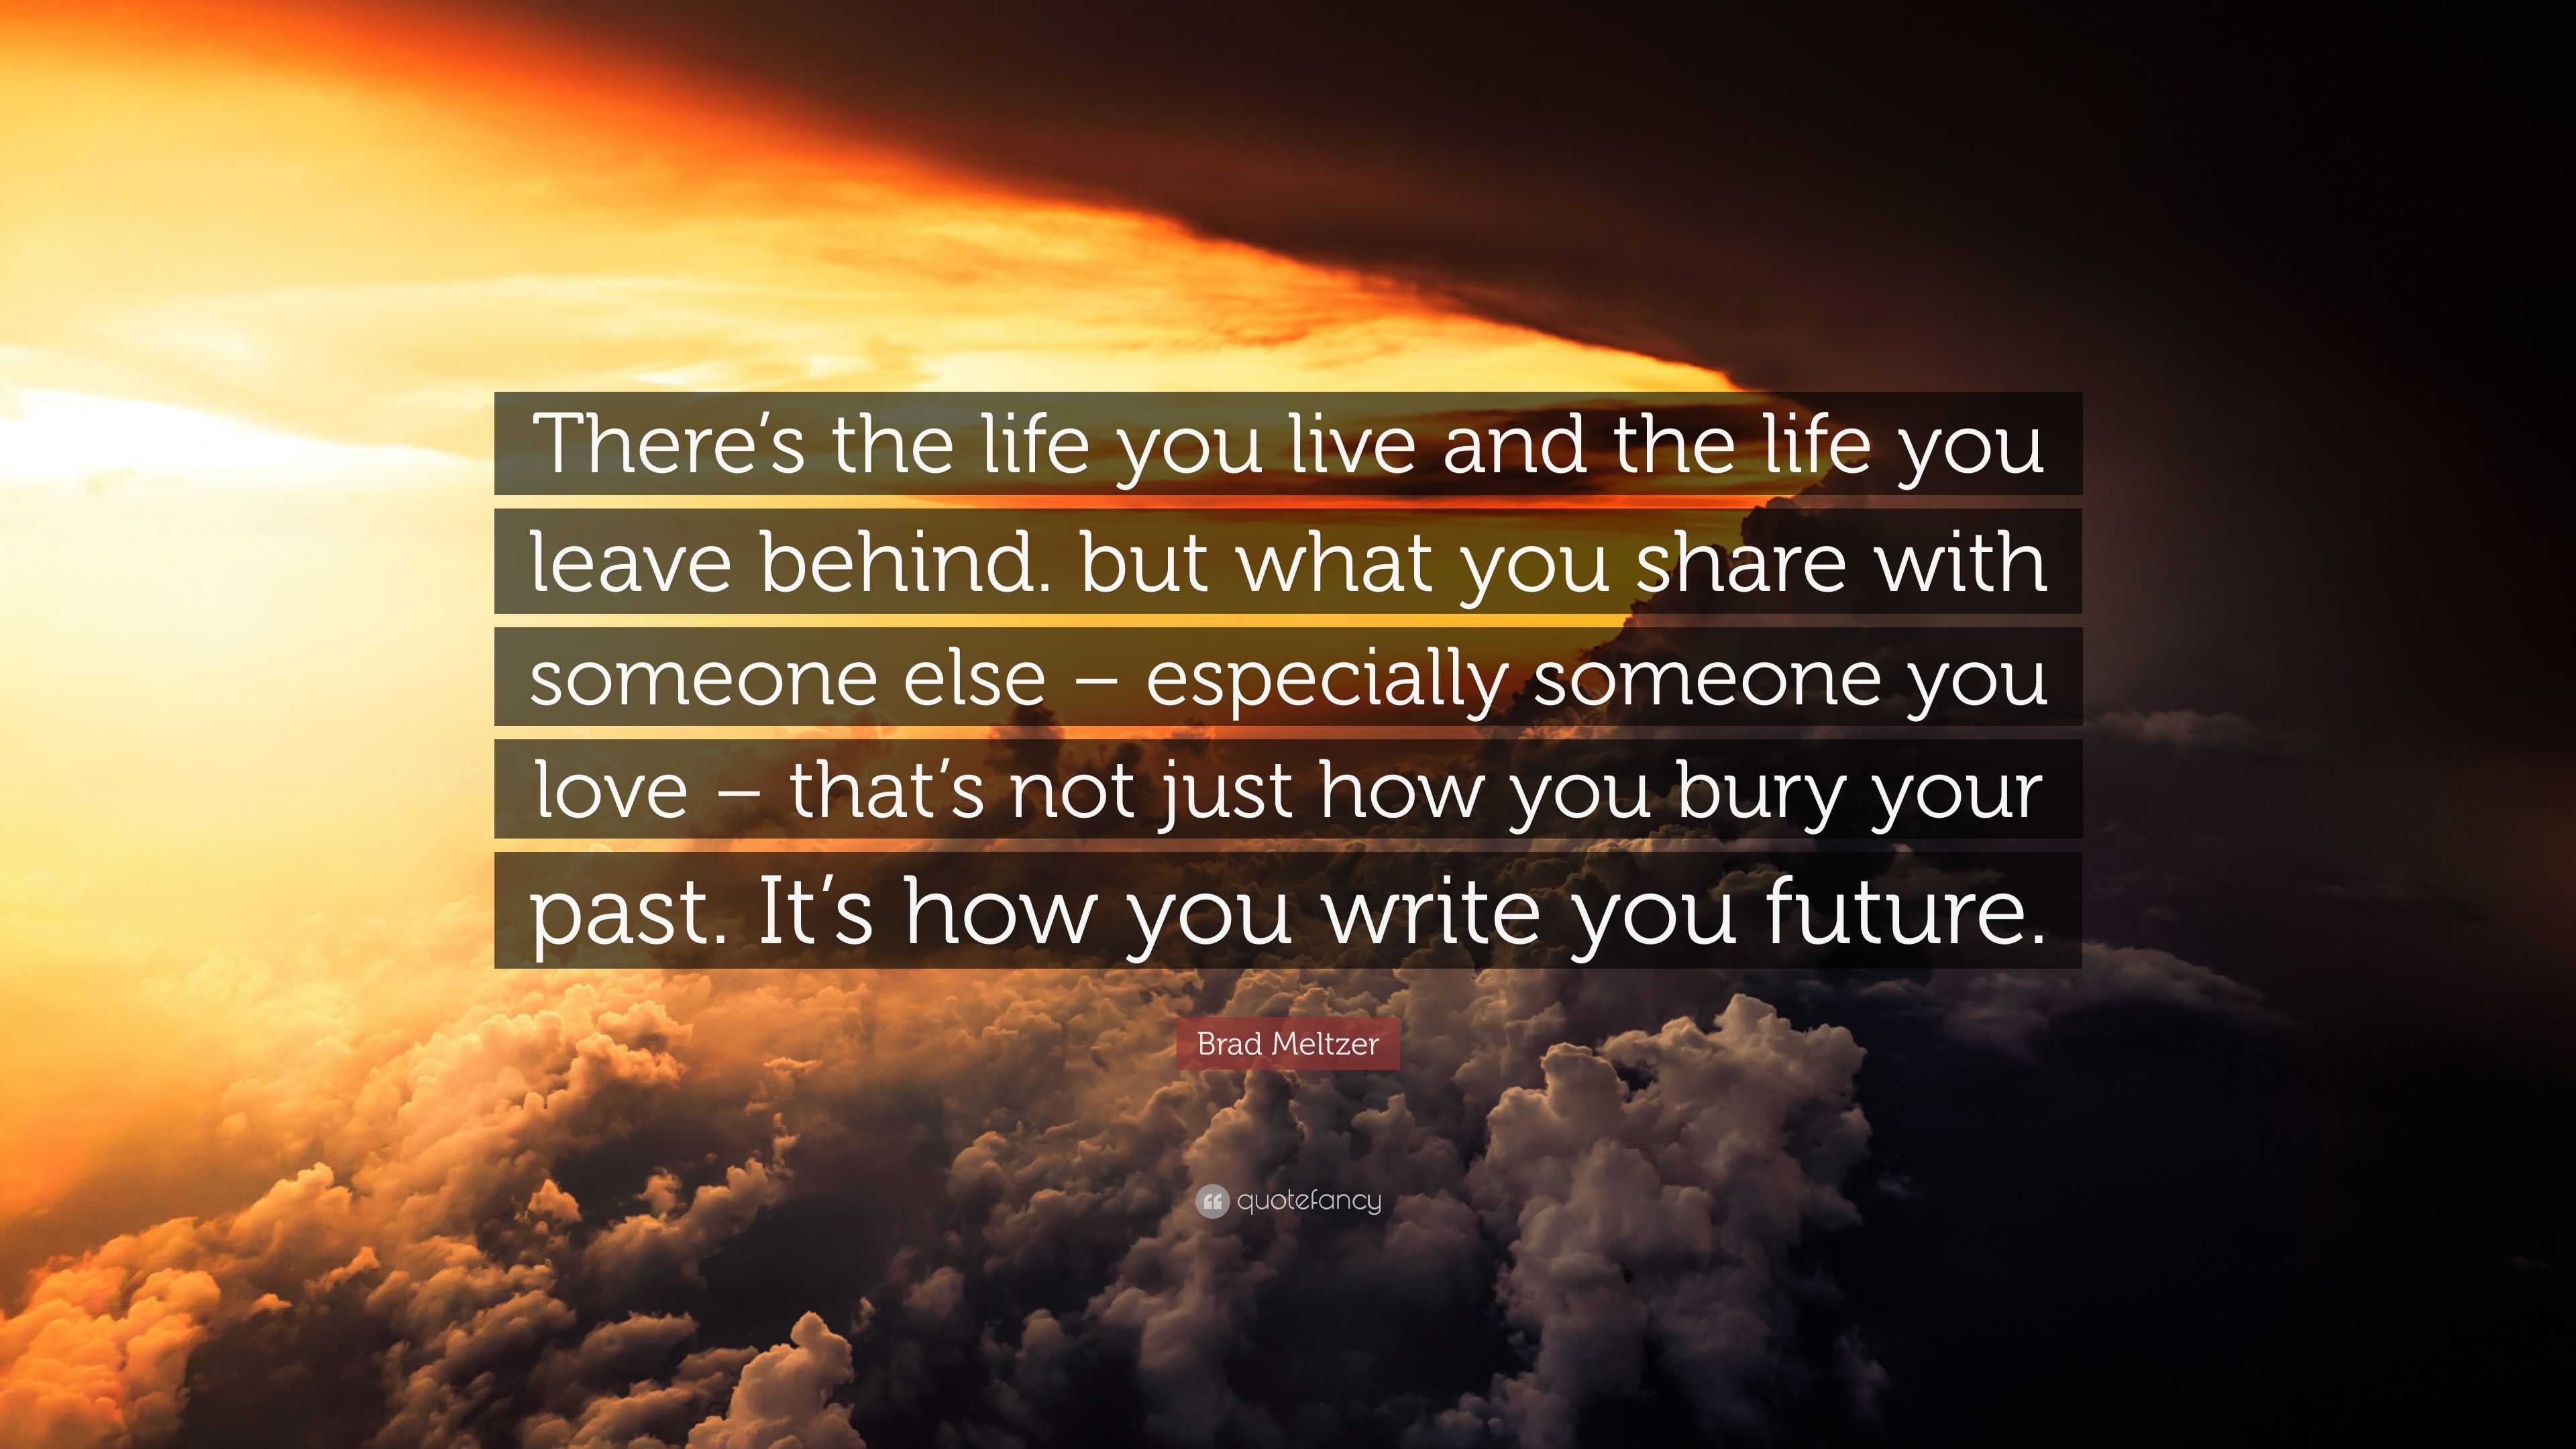 Brad Meltzer Quote “There s the life you live and the life you leave behind